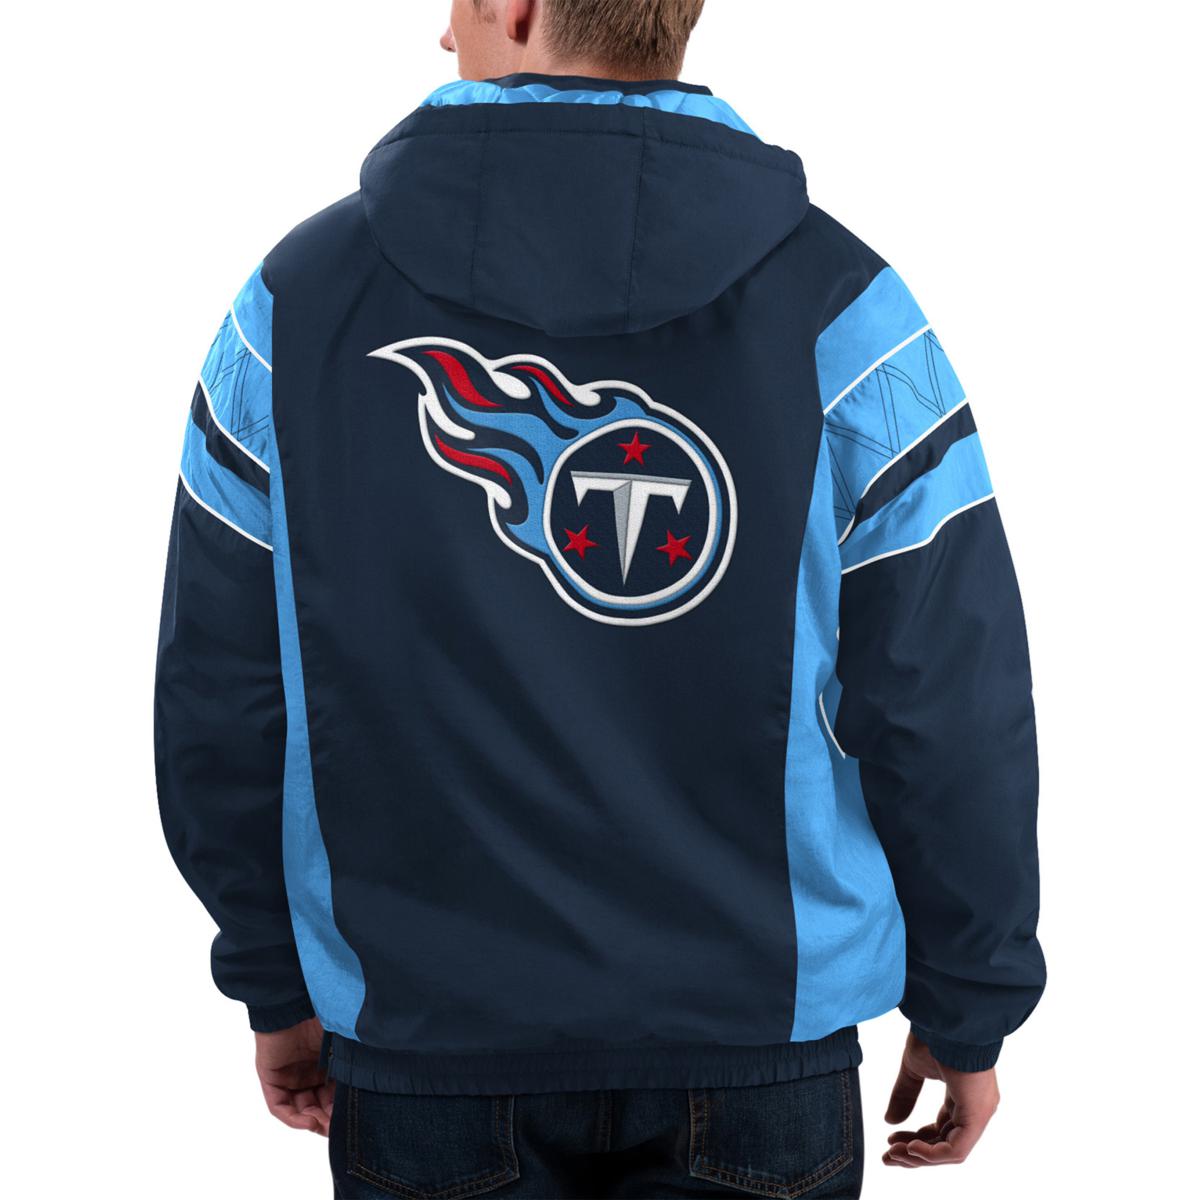 Football Fan Shop Officially Licensed NFL 1/2 Zip Pullover Hooded Jacket - Titans